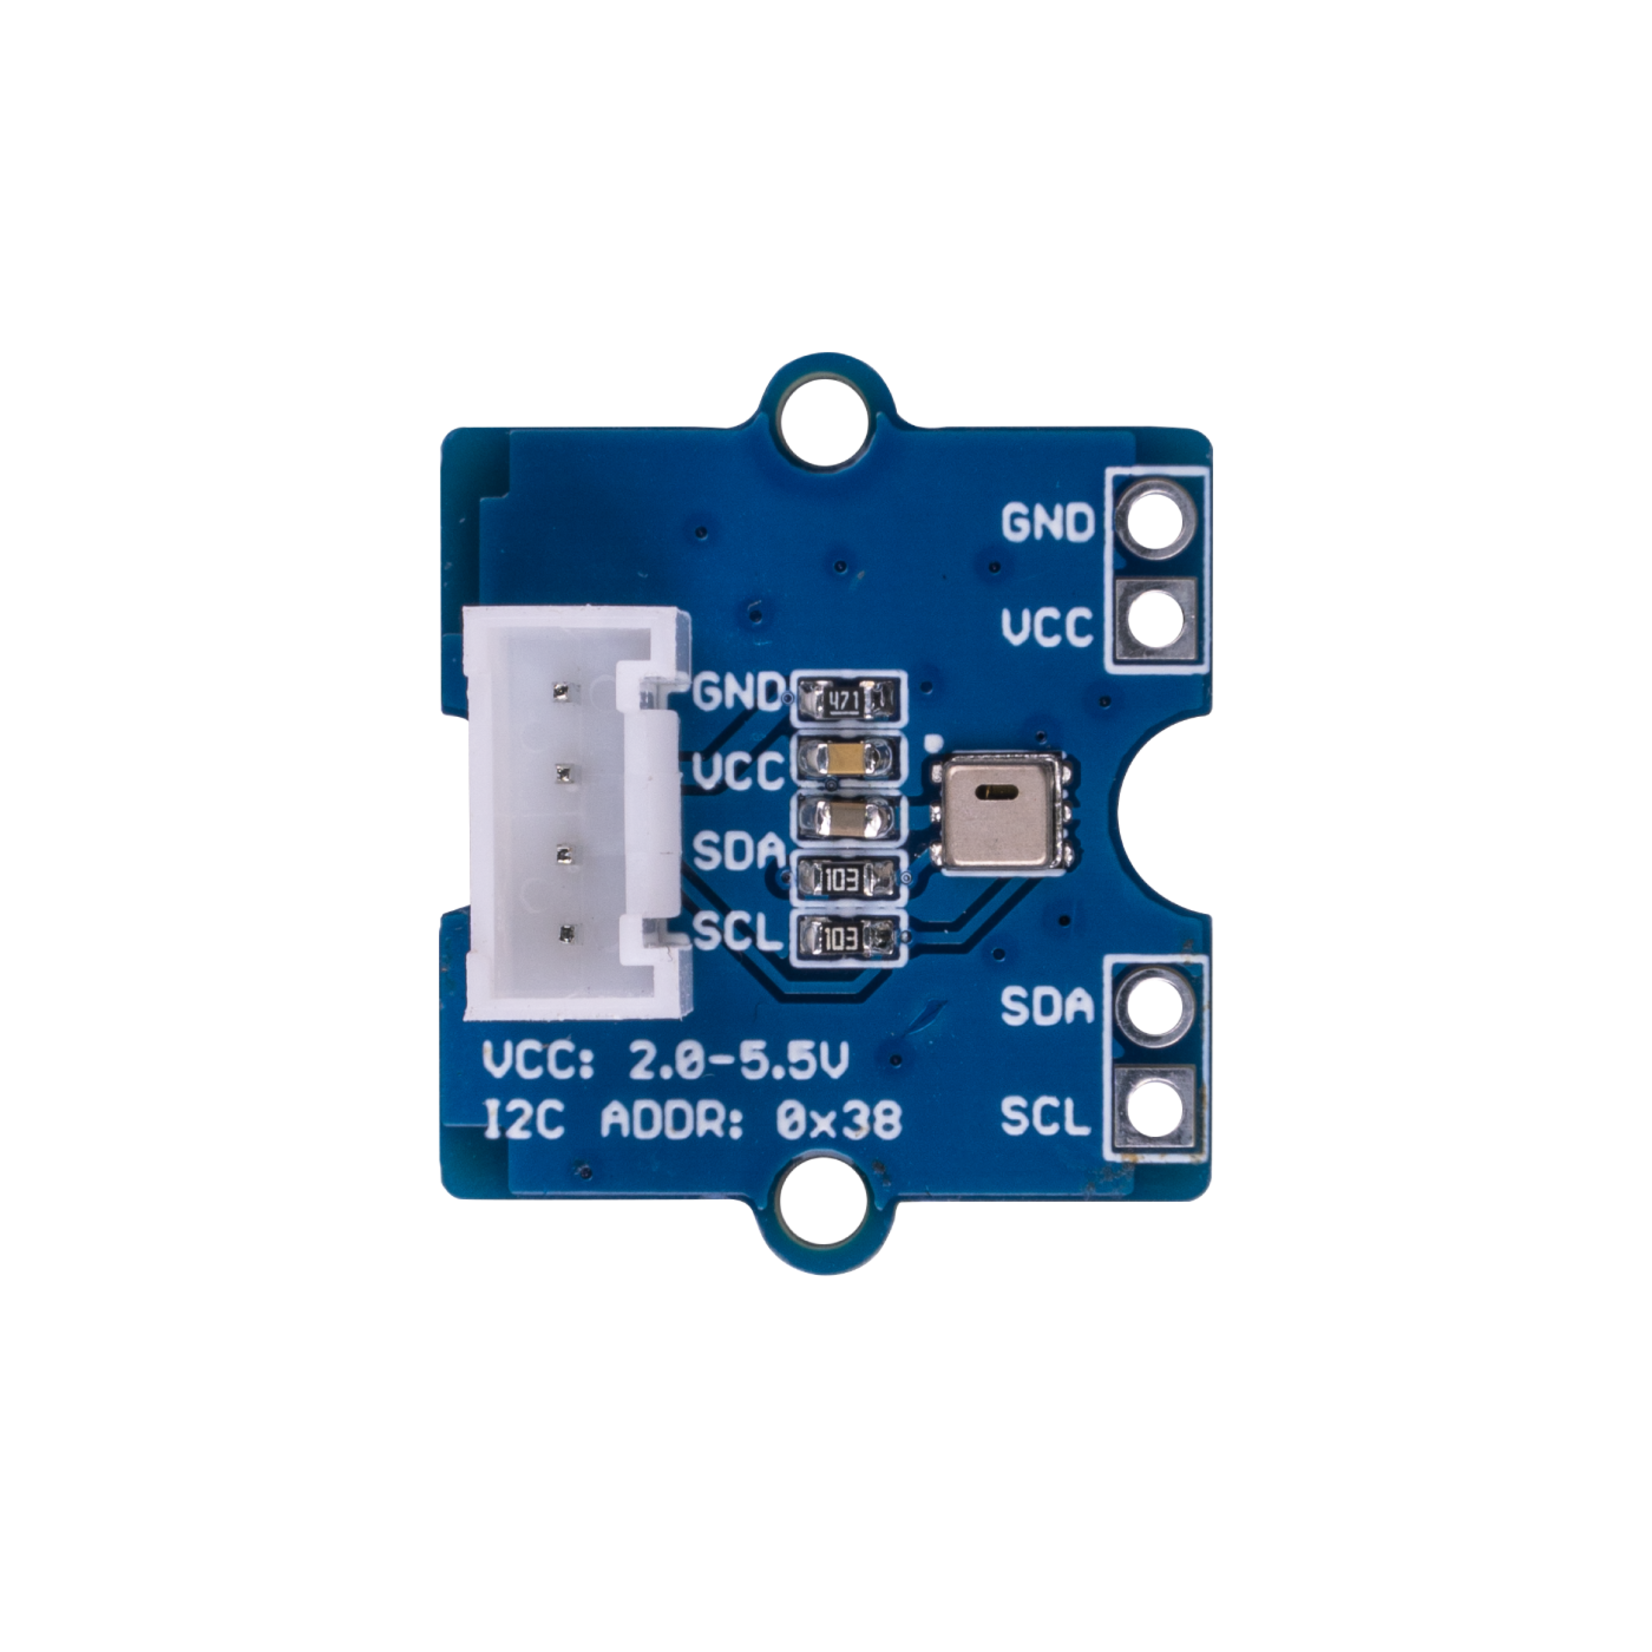 Seeed Grove - I2C Industrial grade temperature and humidity Sensor